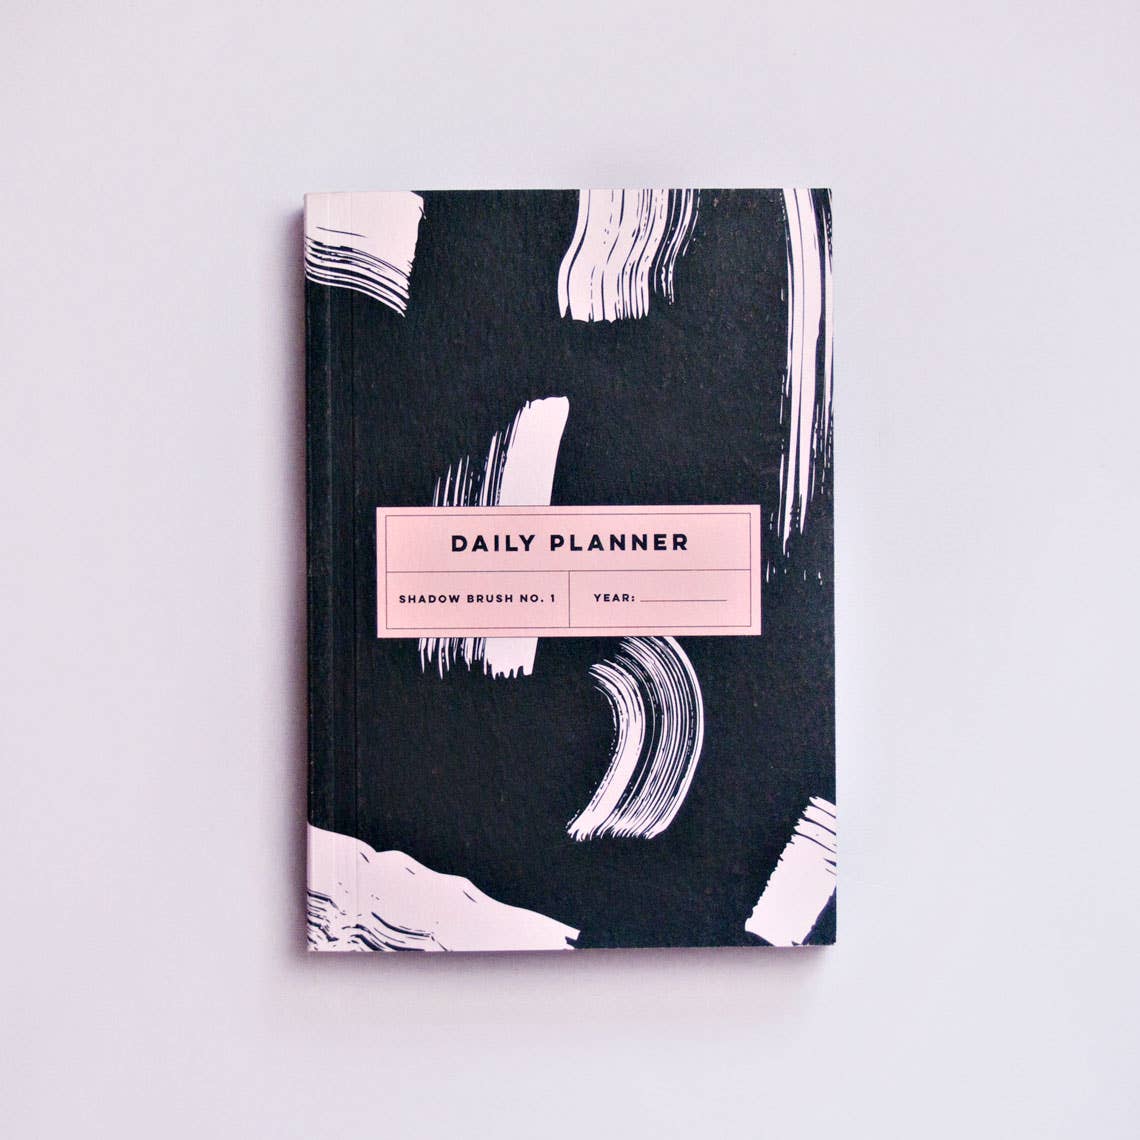 "Shadow Brush No.1" Daily Planner